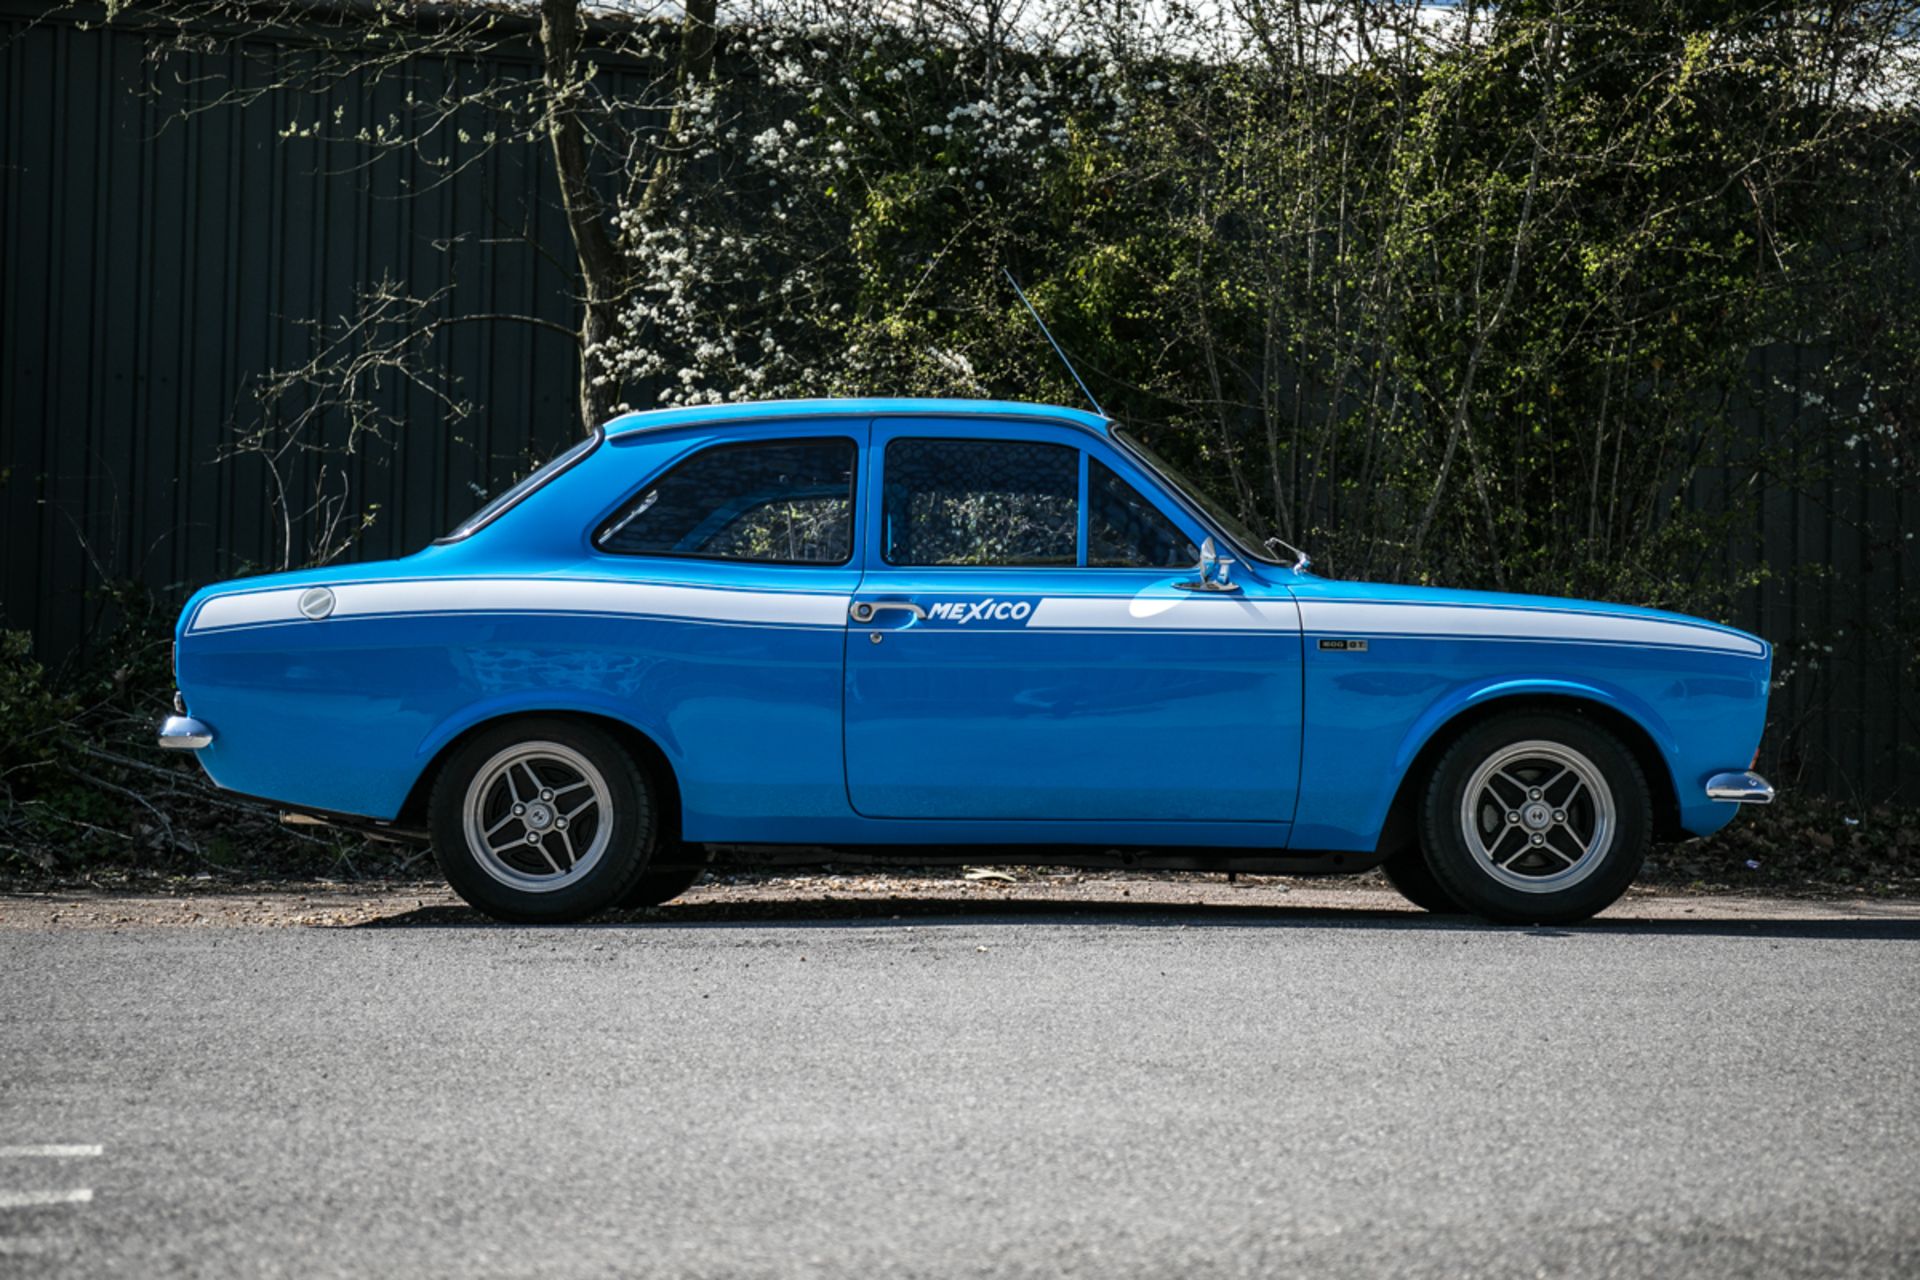 1973 Ford Escort 1600 Mexico - Image 3 of 20